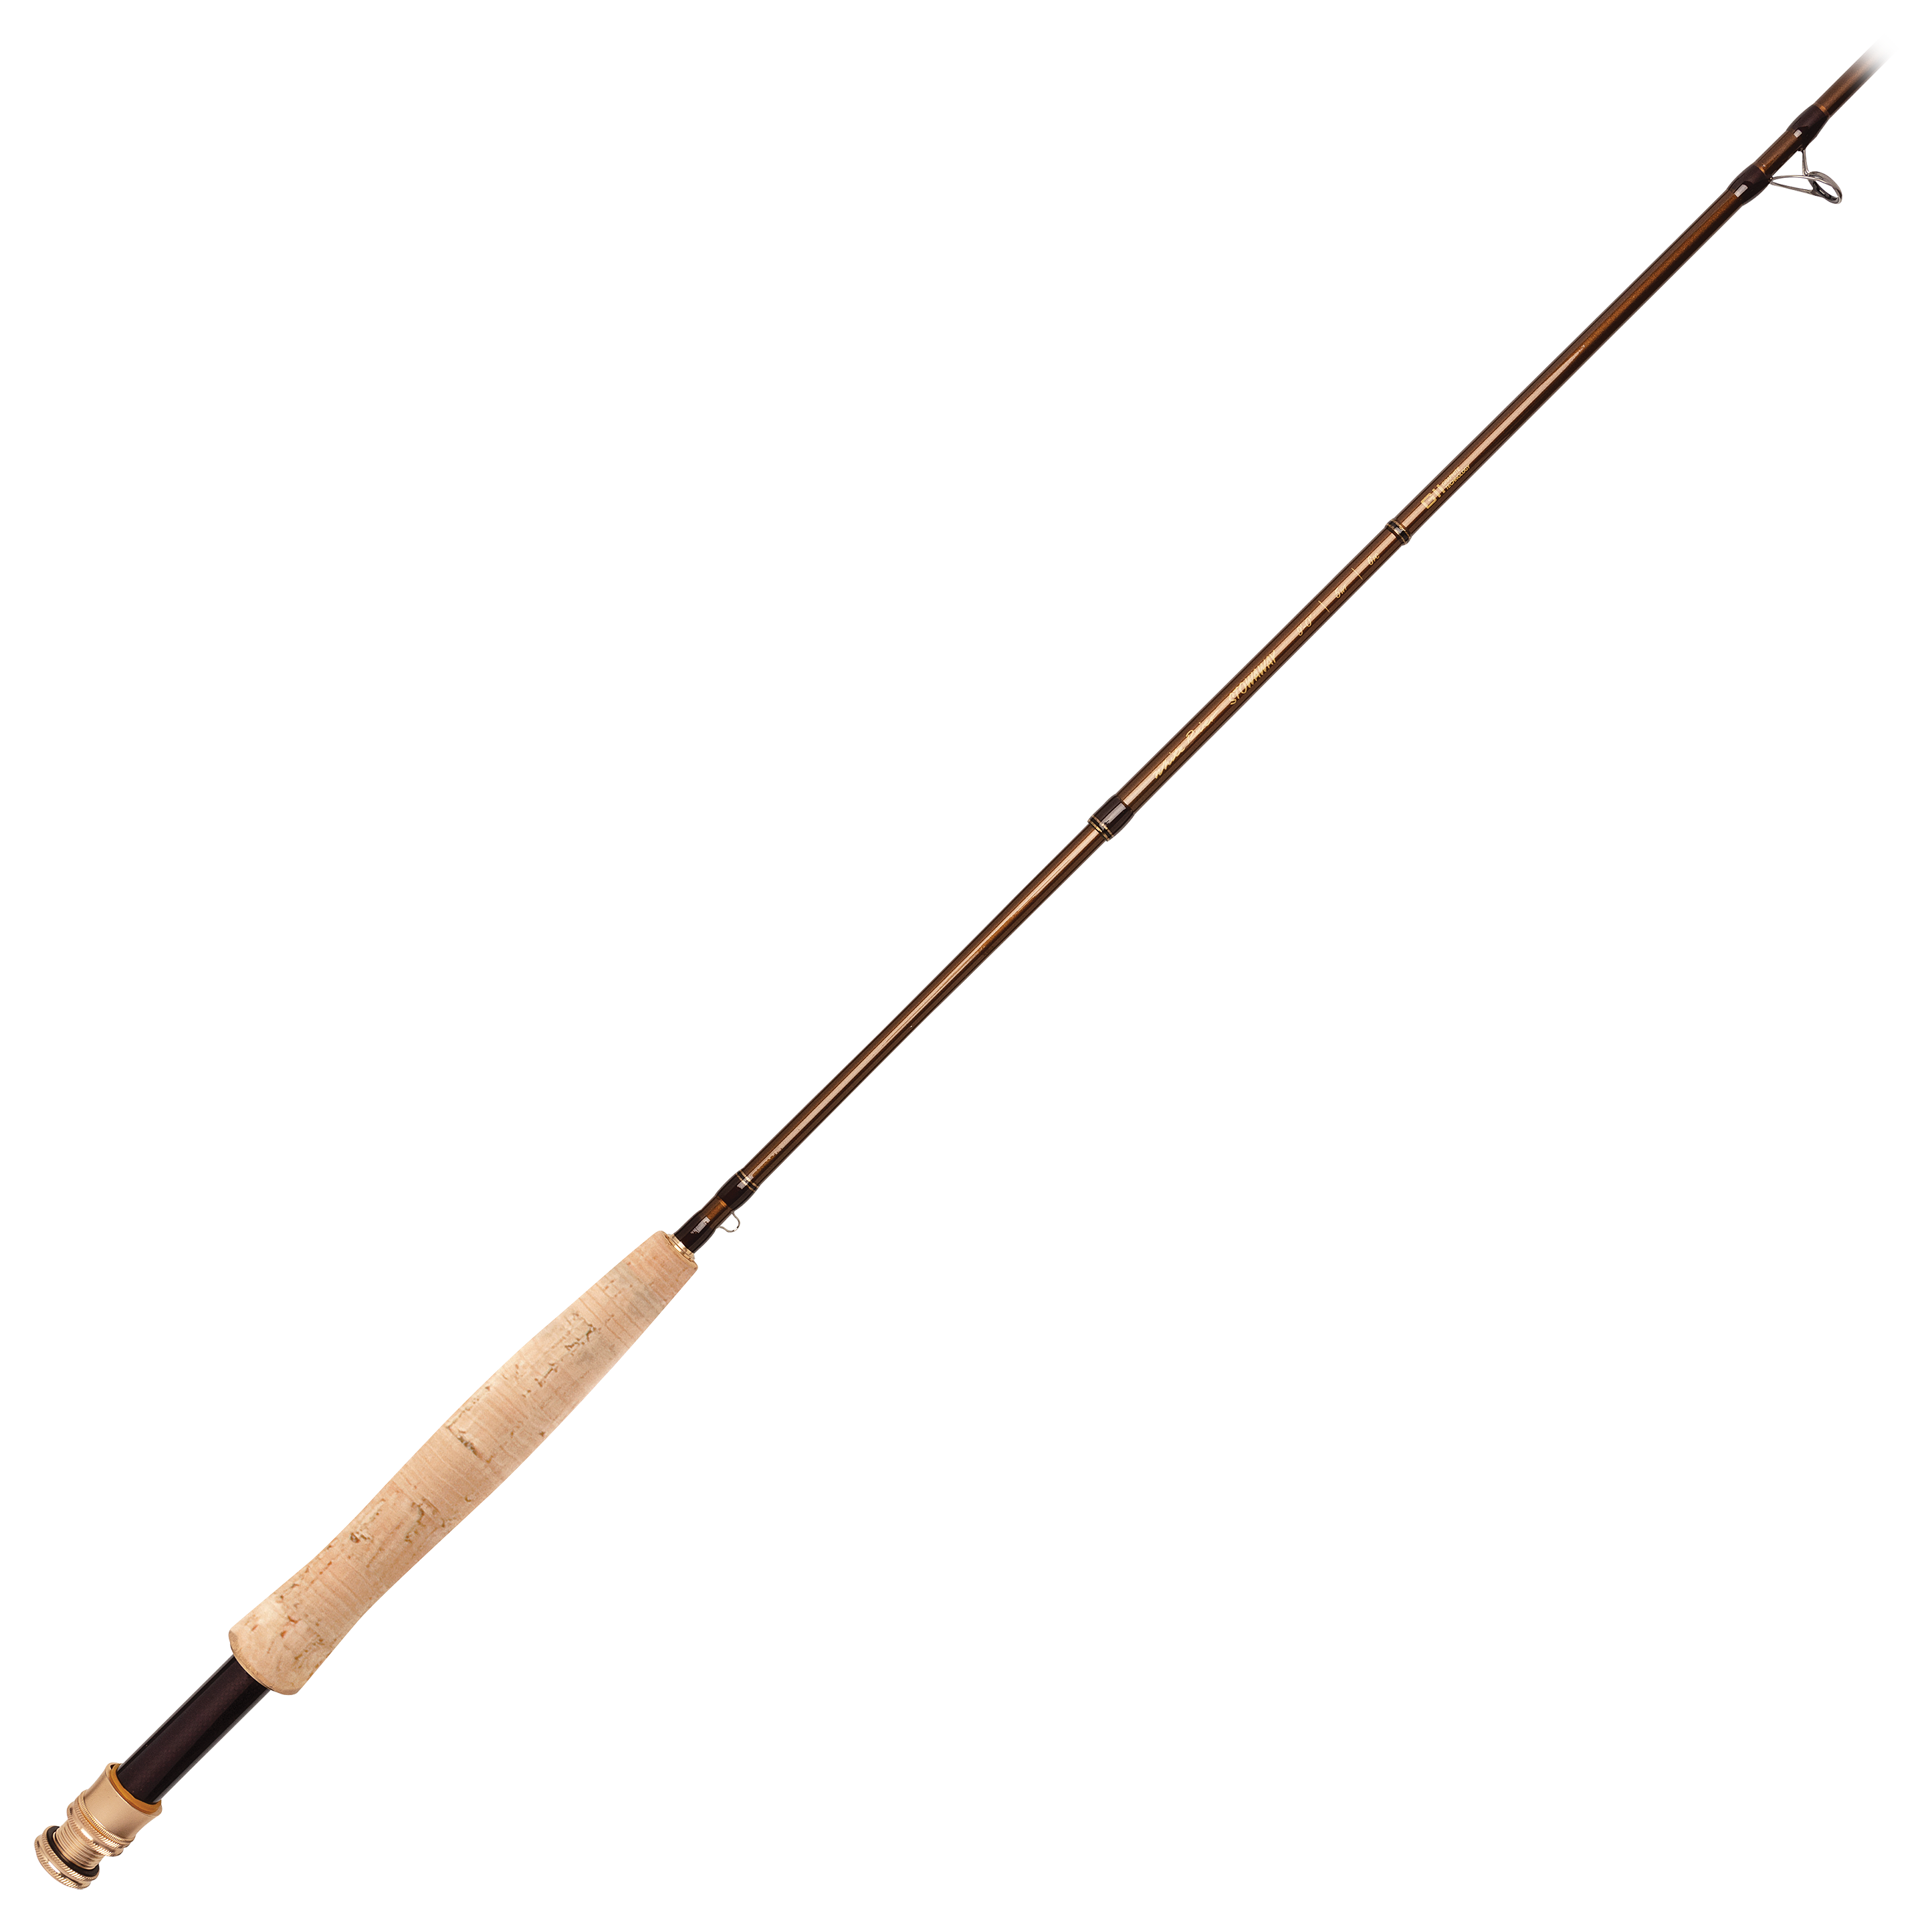 White River Fly Shop Stowaway Fly Rod - WRST764-6